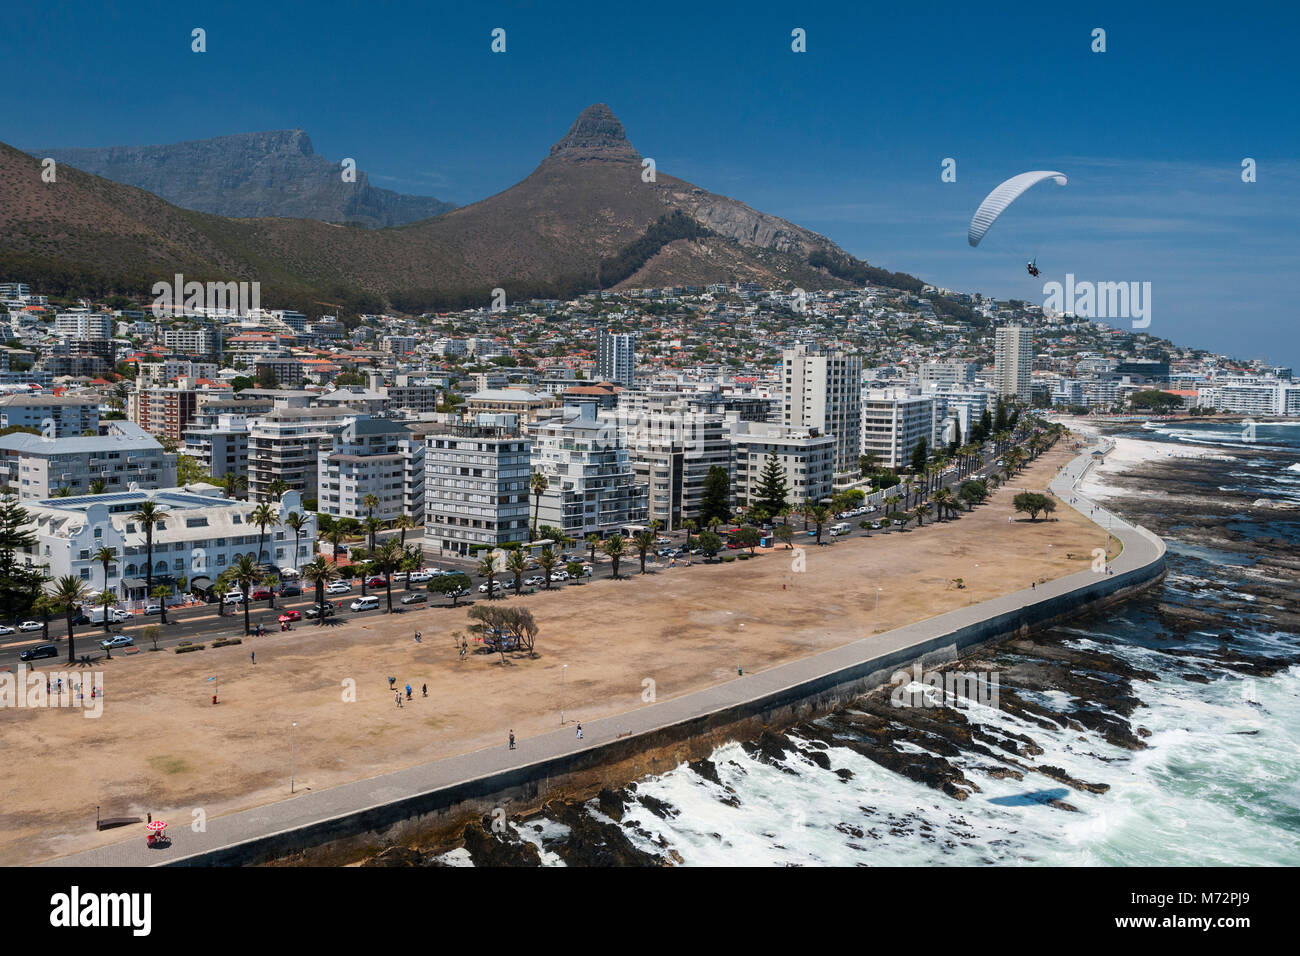 Tandem paraglider flying above Cape Town’s Atlantic seaboard suburb of Sea Point with Table Mountain and Lion’s Head in the background. Stock Photo